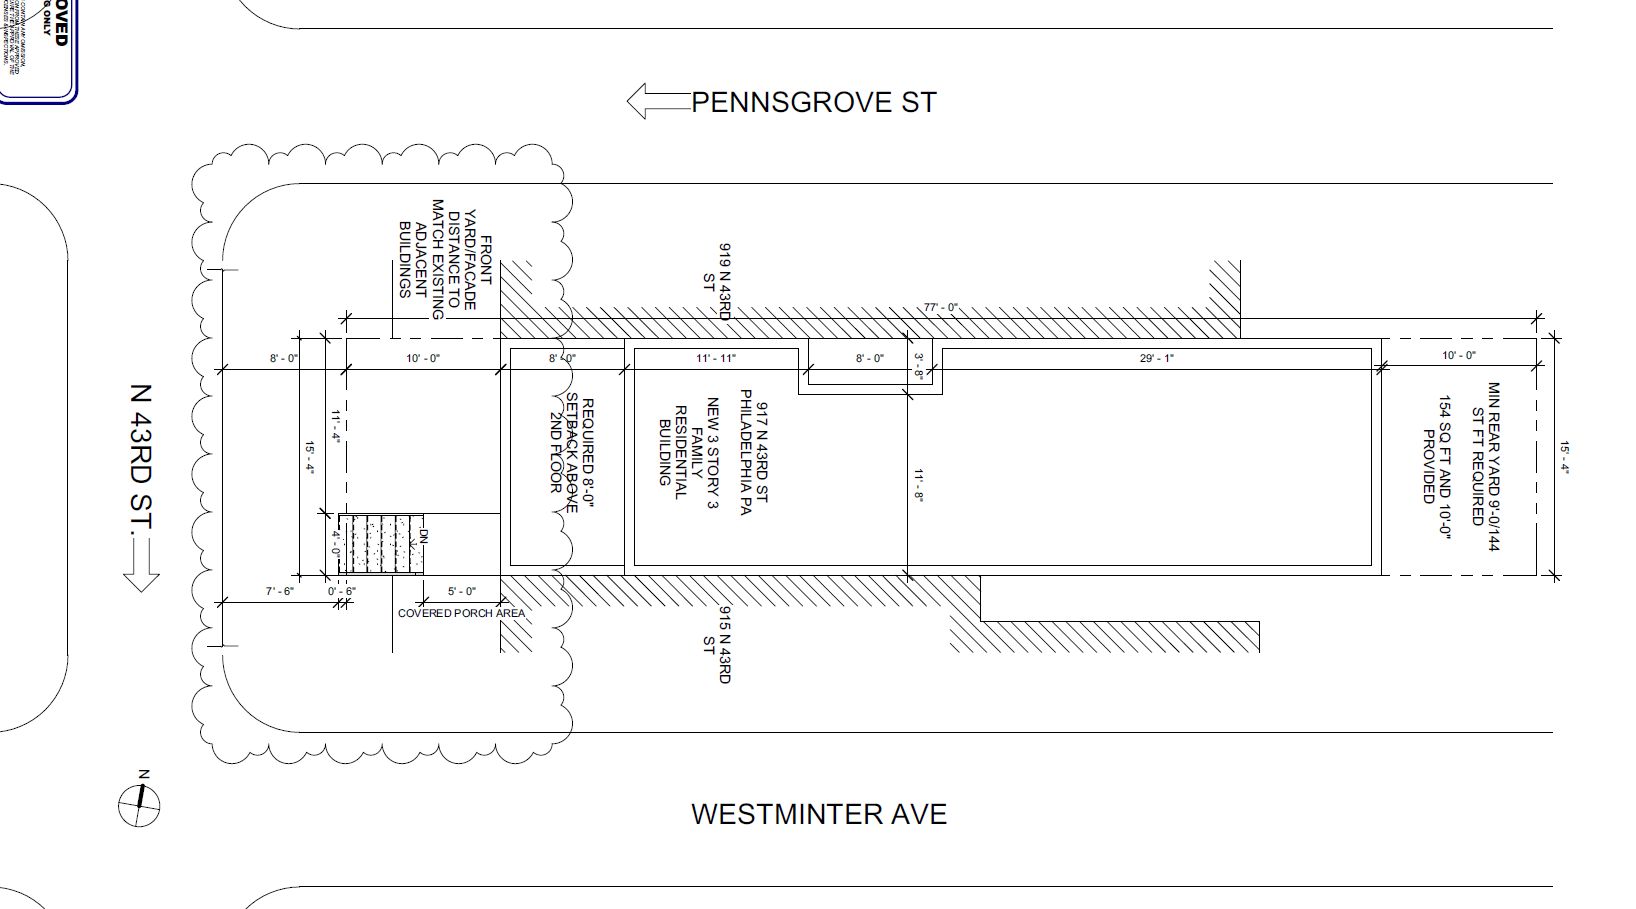 917 North 43rd Street. Site plan (original version). Credit: J Design and Consultants via the Department of Planning and Development of the City of Philadelphia